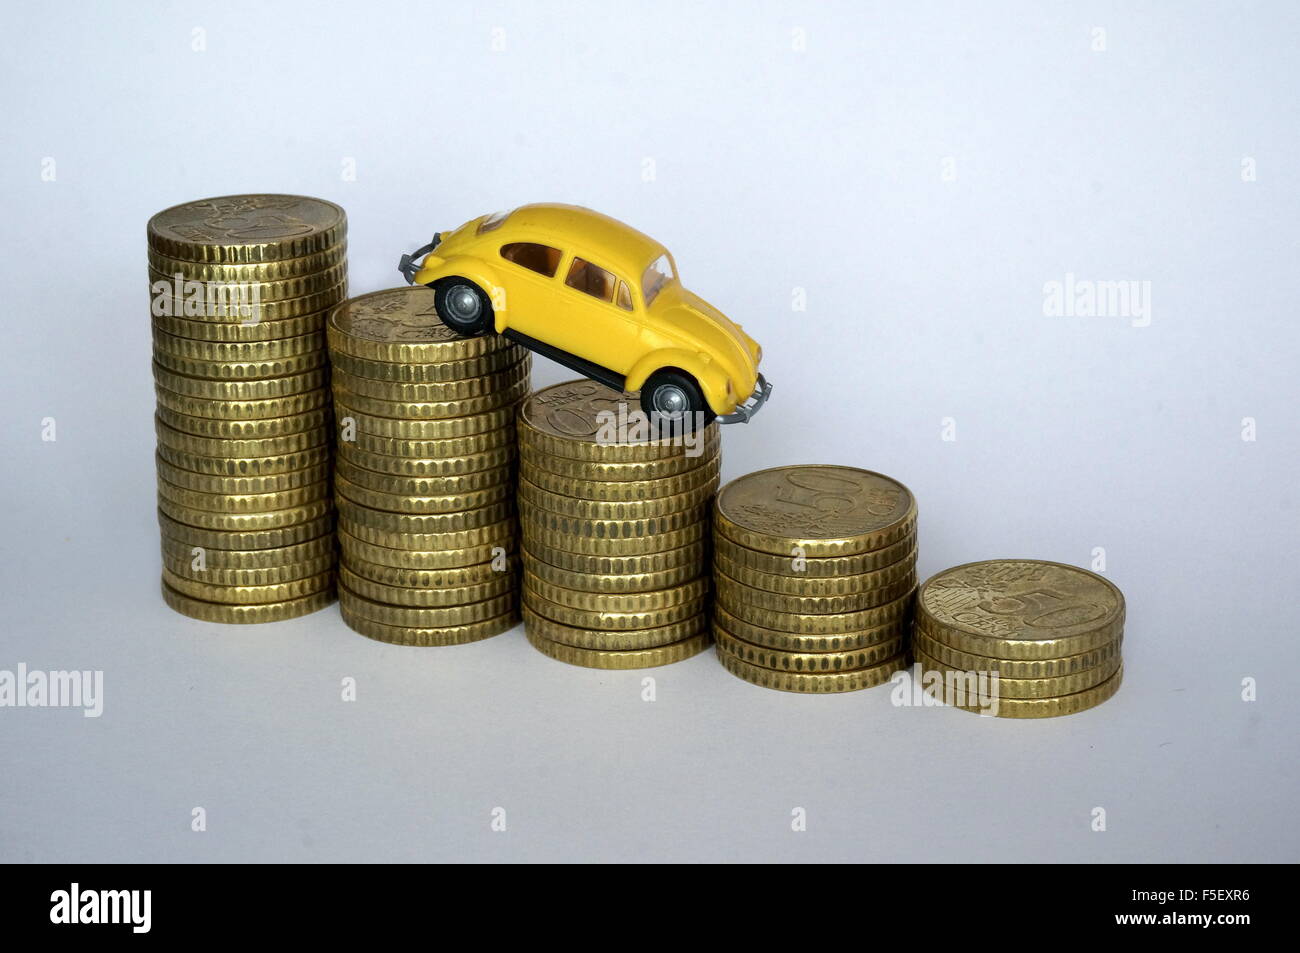 ILLUSTRATION - A Volkswagen Beetle model on decreasing money piles. The photo was taken on 06 October 2015. Photo: S. Steinach - NO WIRE SERVICE- Stock Photo